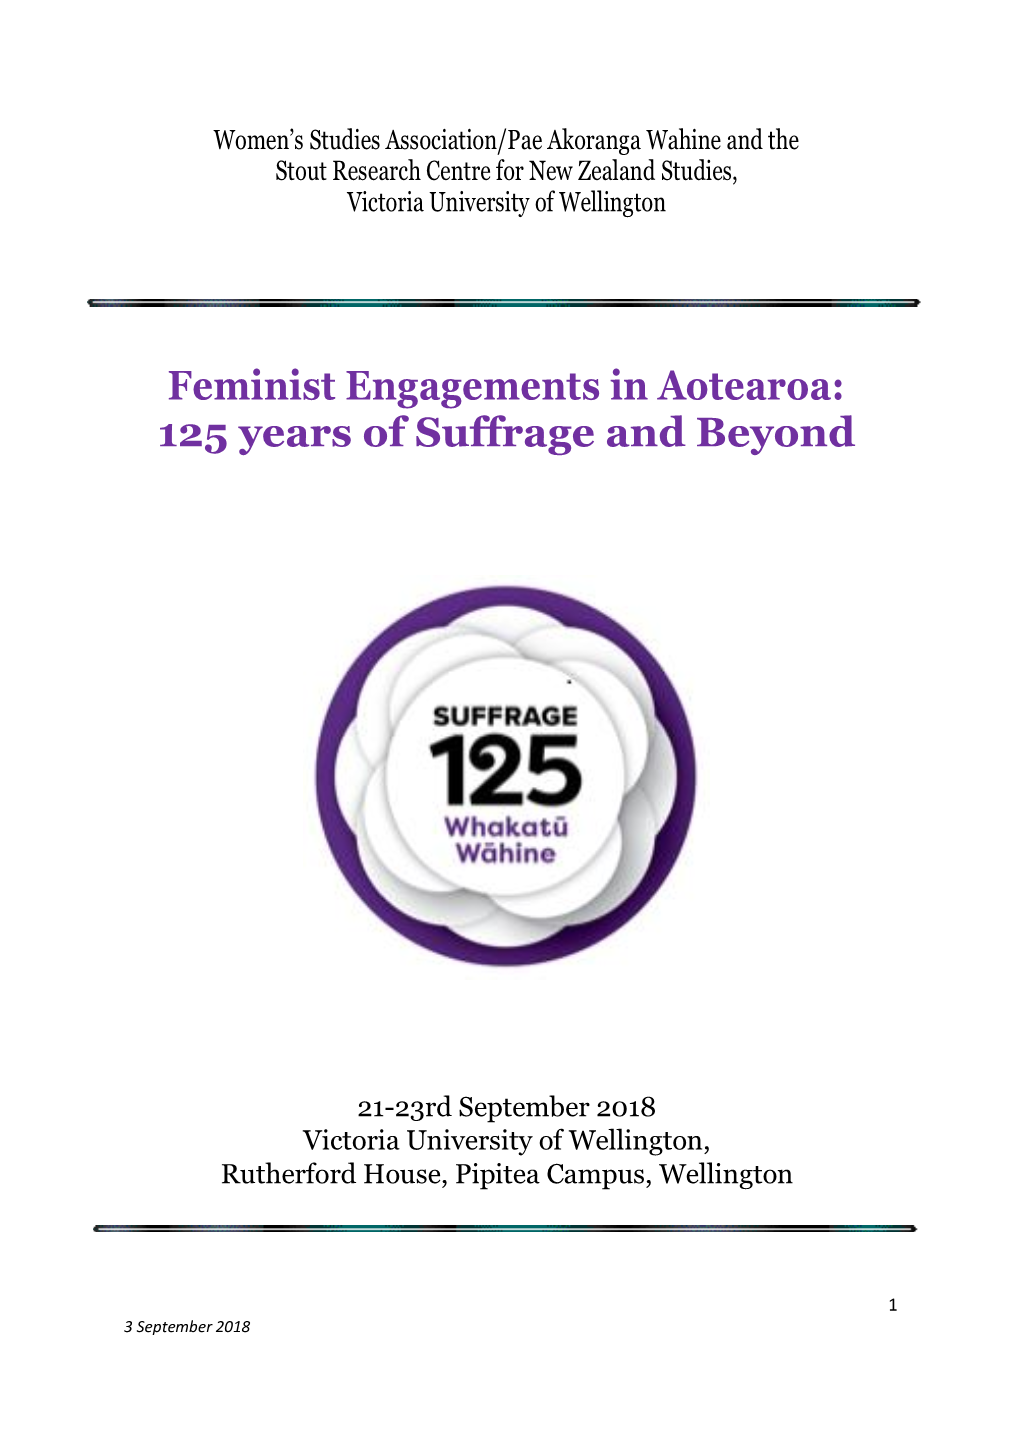 Feminist Engagements in Aotearoa: 125 Years of Suffrage and Beyond